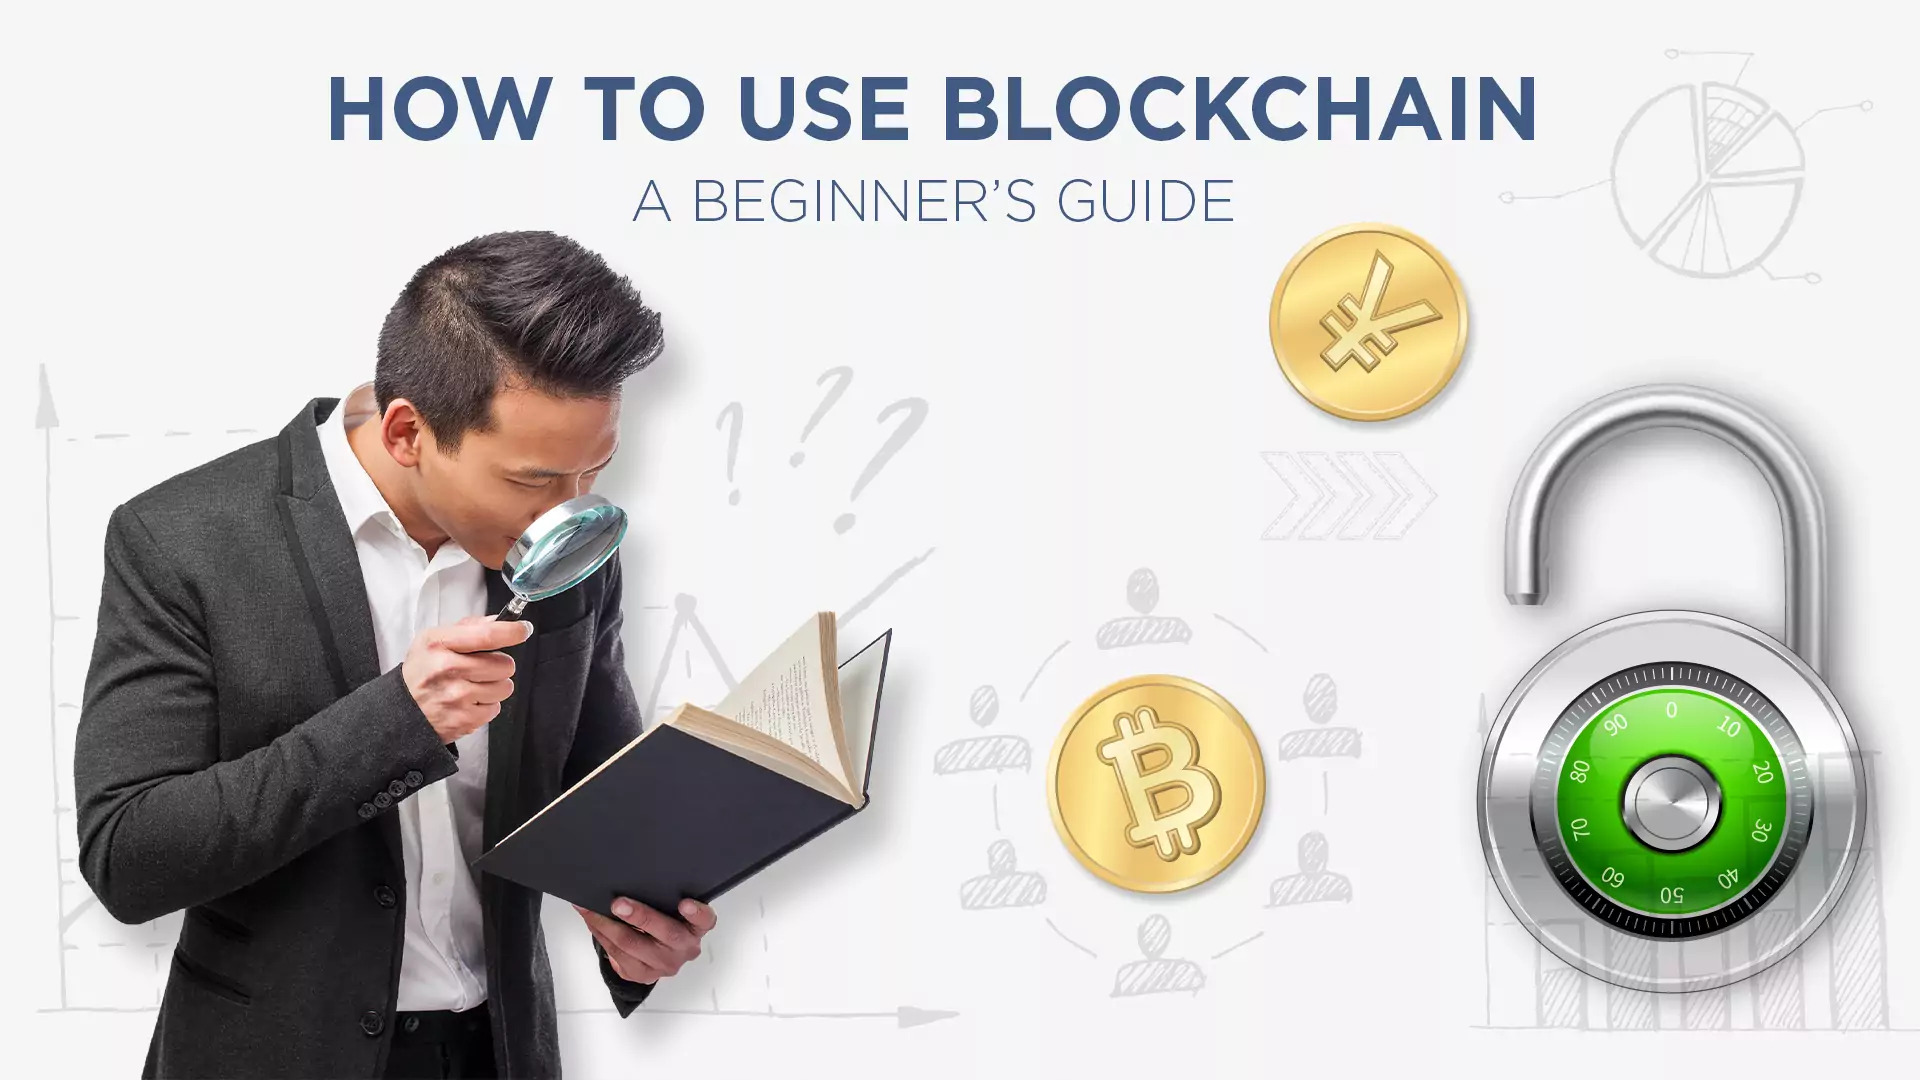 How to use blockchain: A beginner's guide